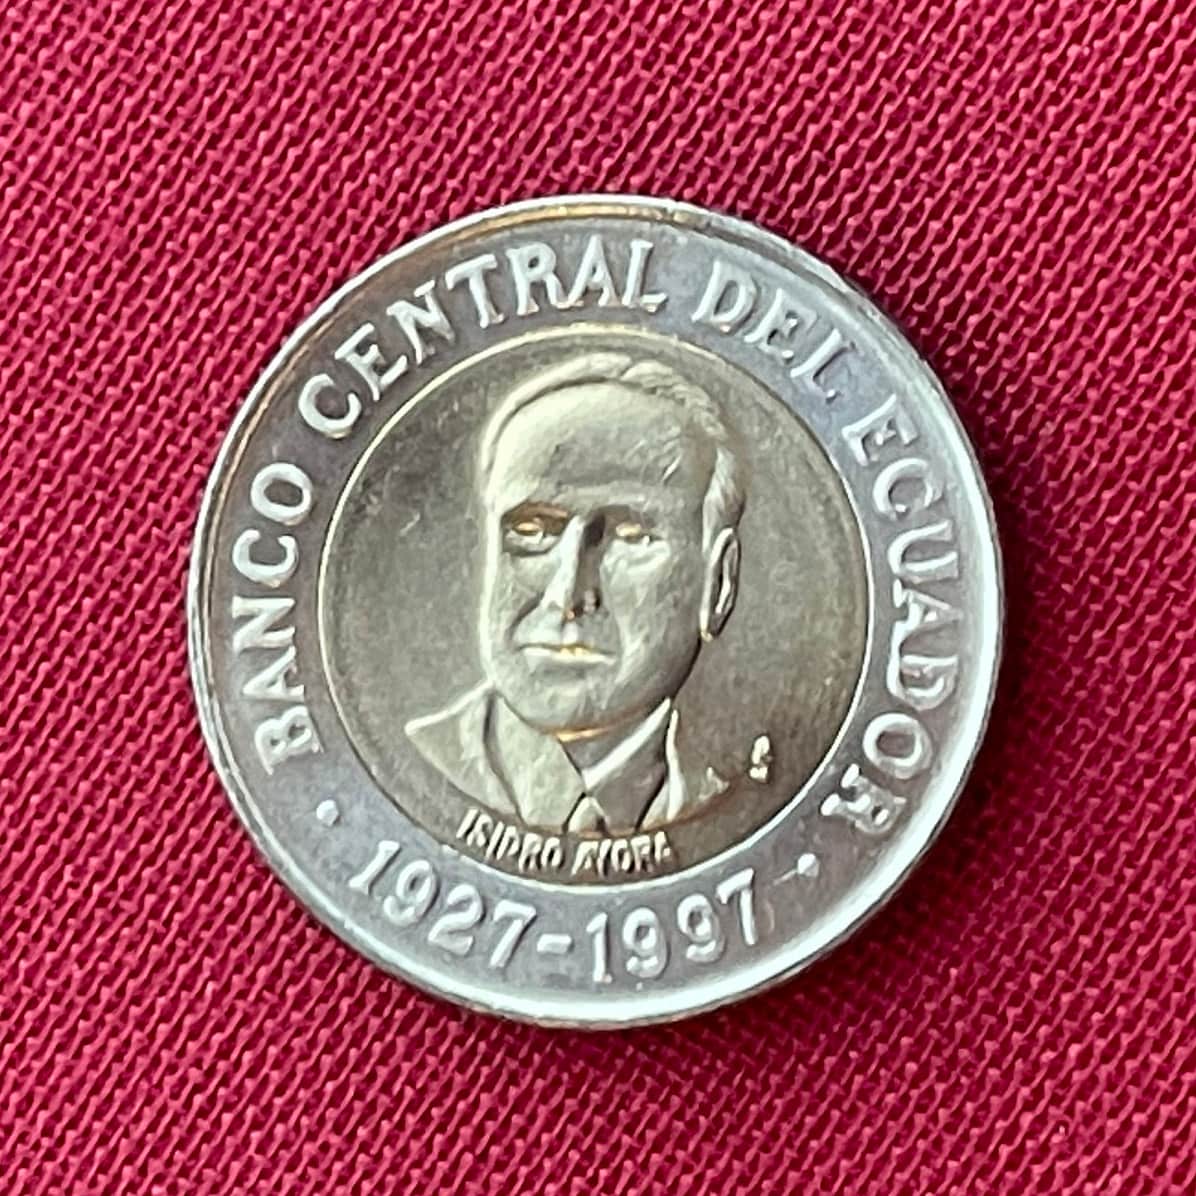 Doctor Isidro Ayora President of Ecuador Bi-Metallic 500 Sucres Authentic Coin Money for Jewelry and Craft-Making